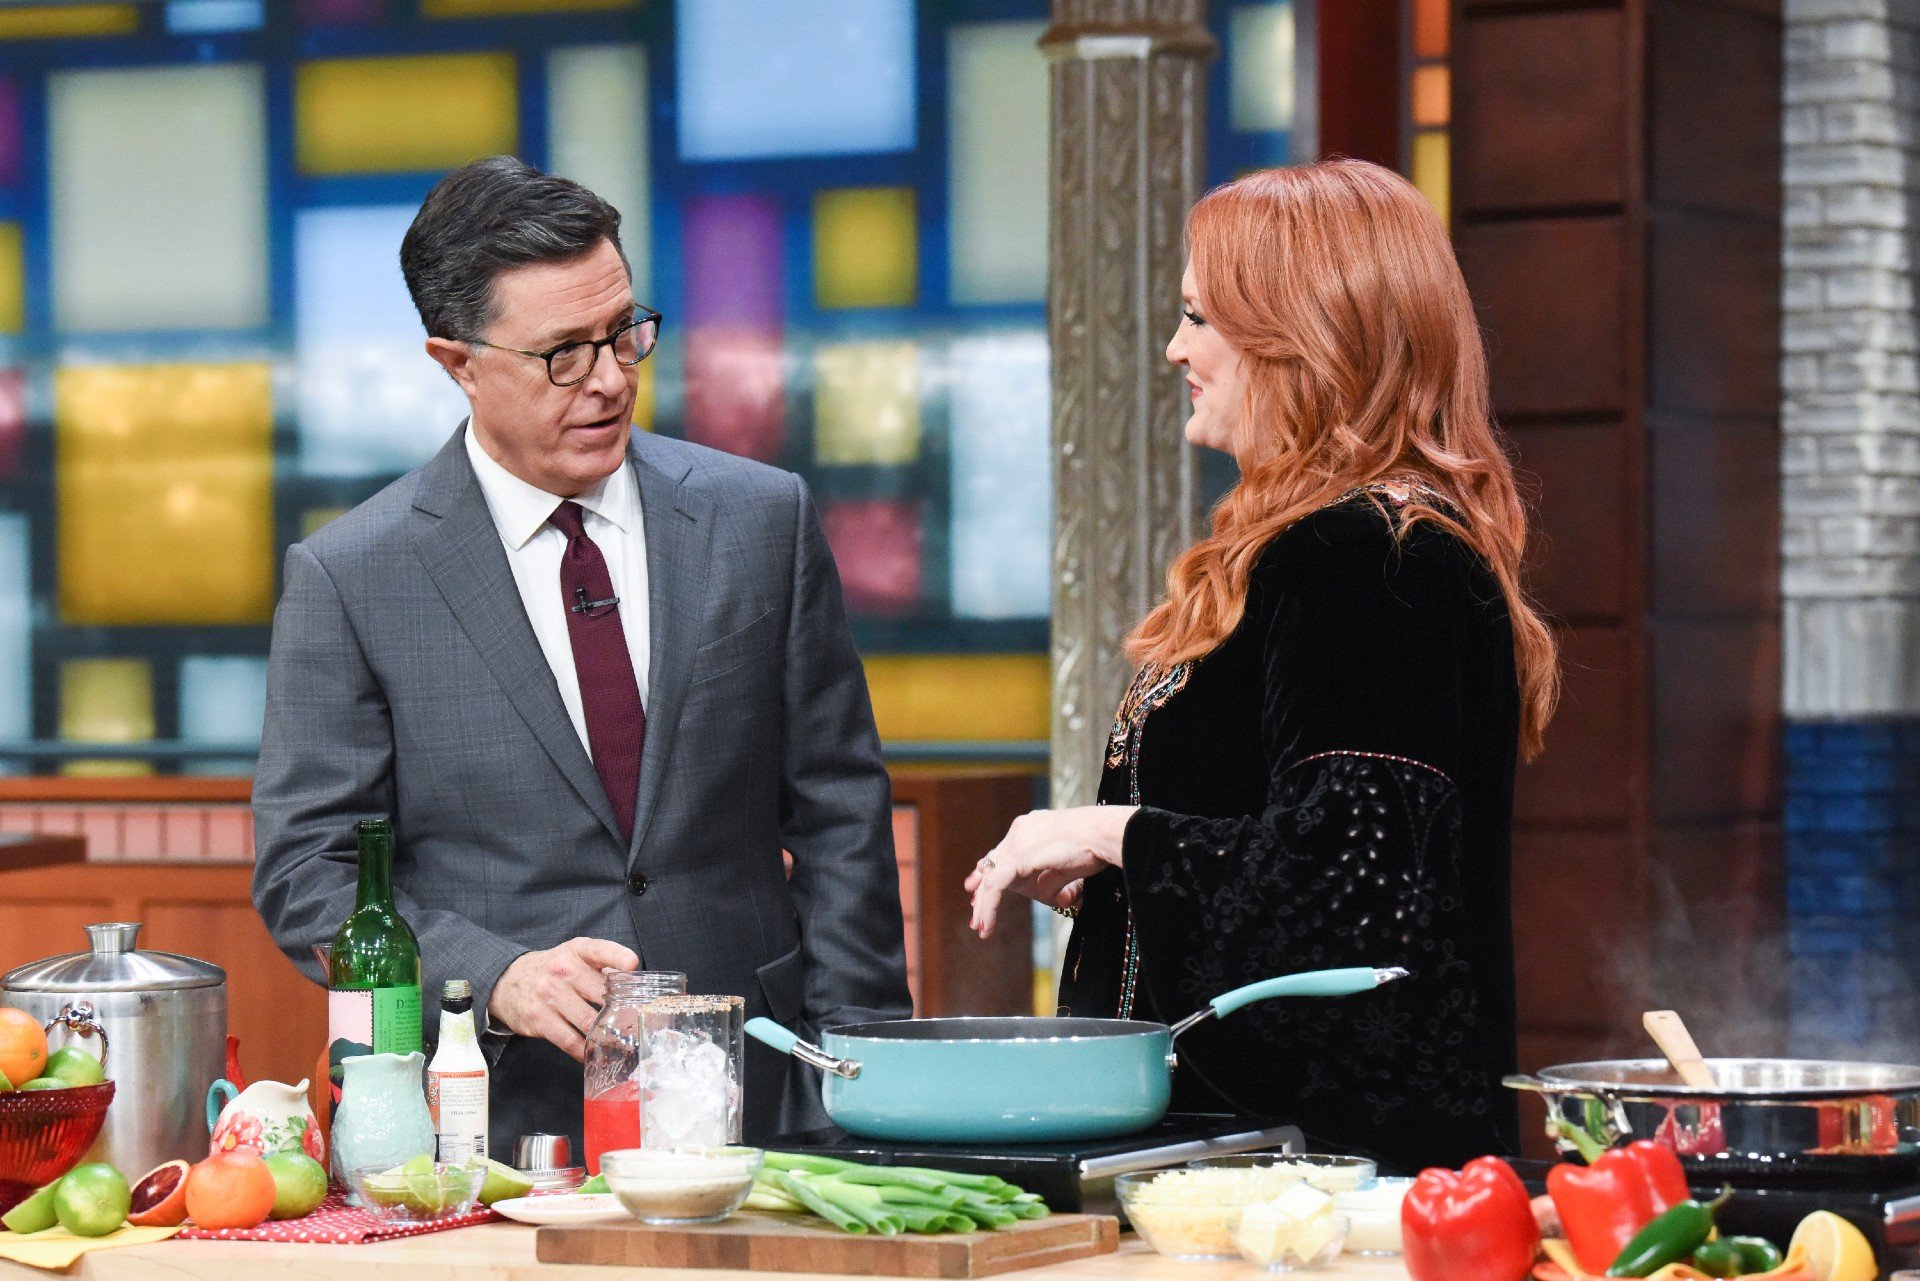 Stephen Colbert and The Pioneer Woman Ree Drummond do a cooking demonstration.